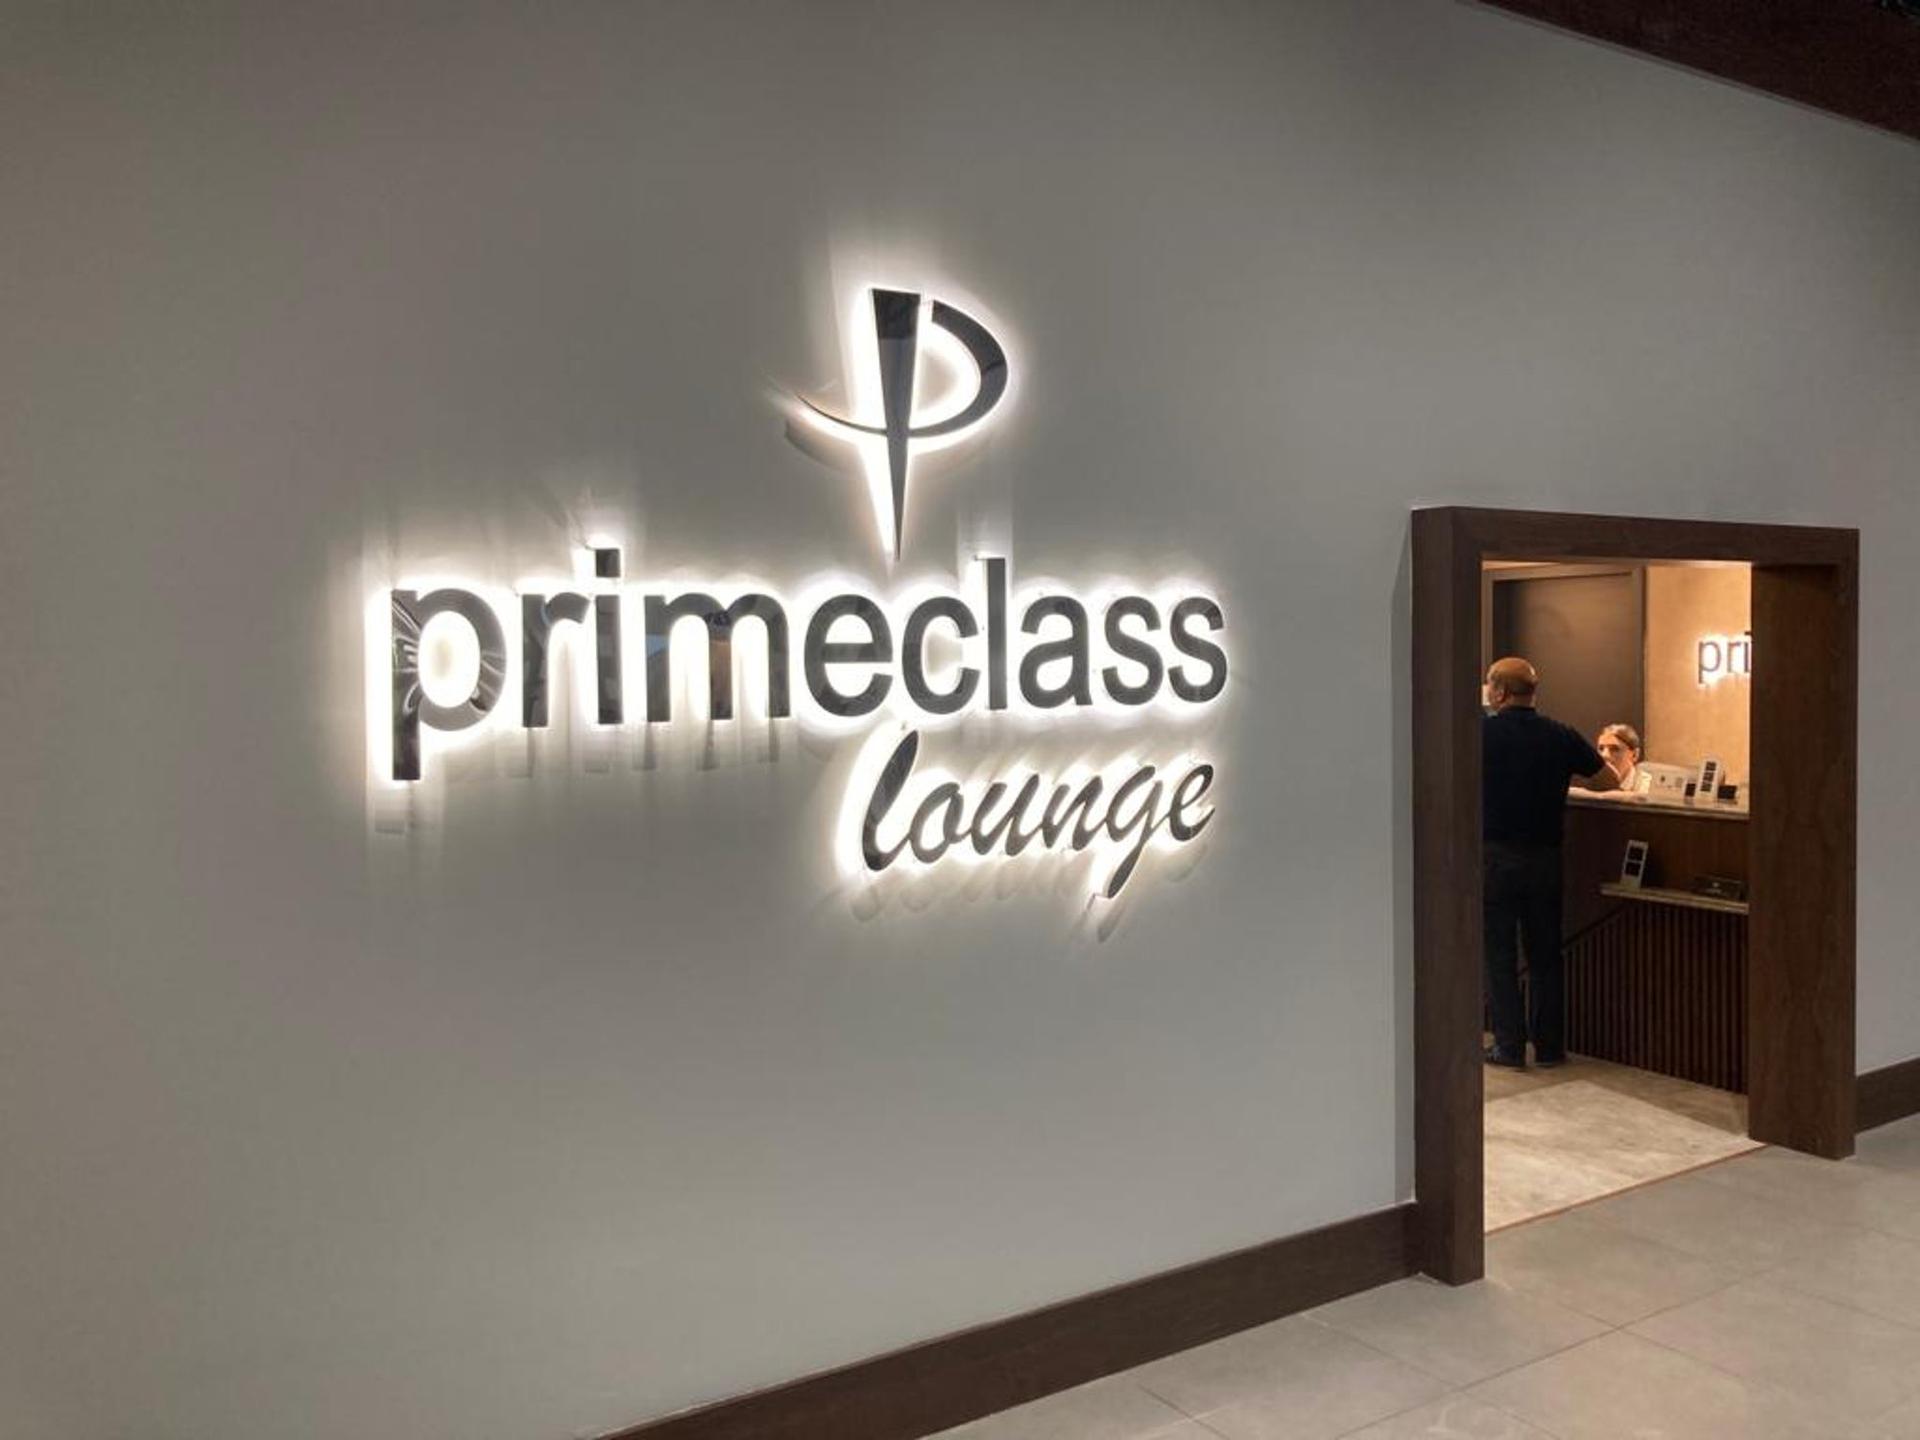 Primeclass Business Lounge image 5 of 5